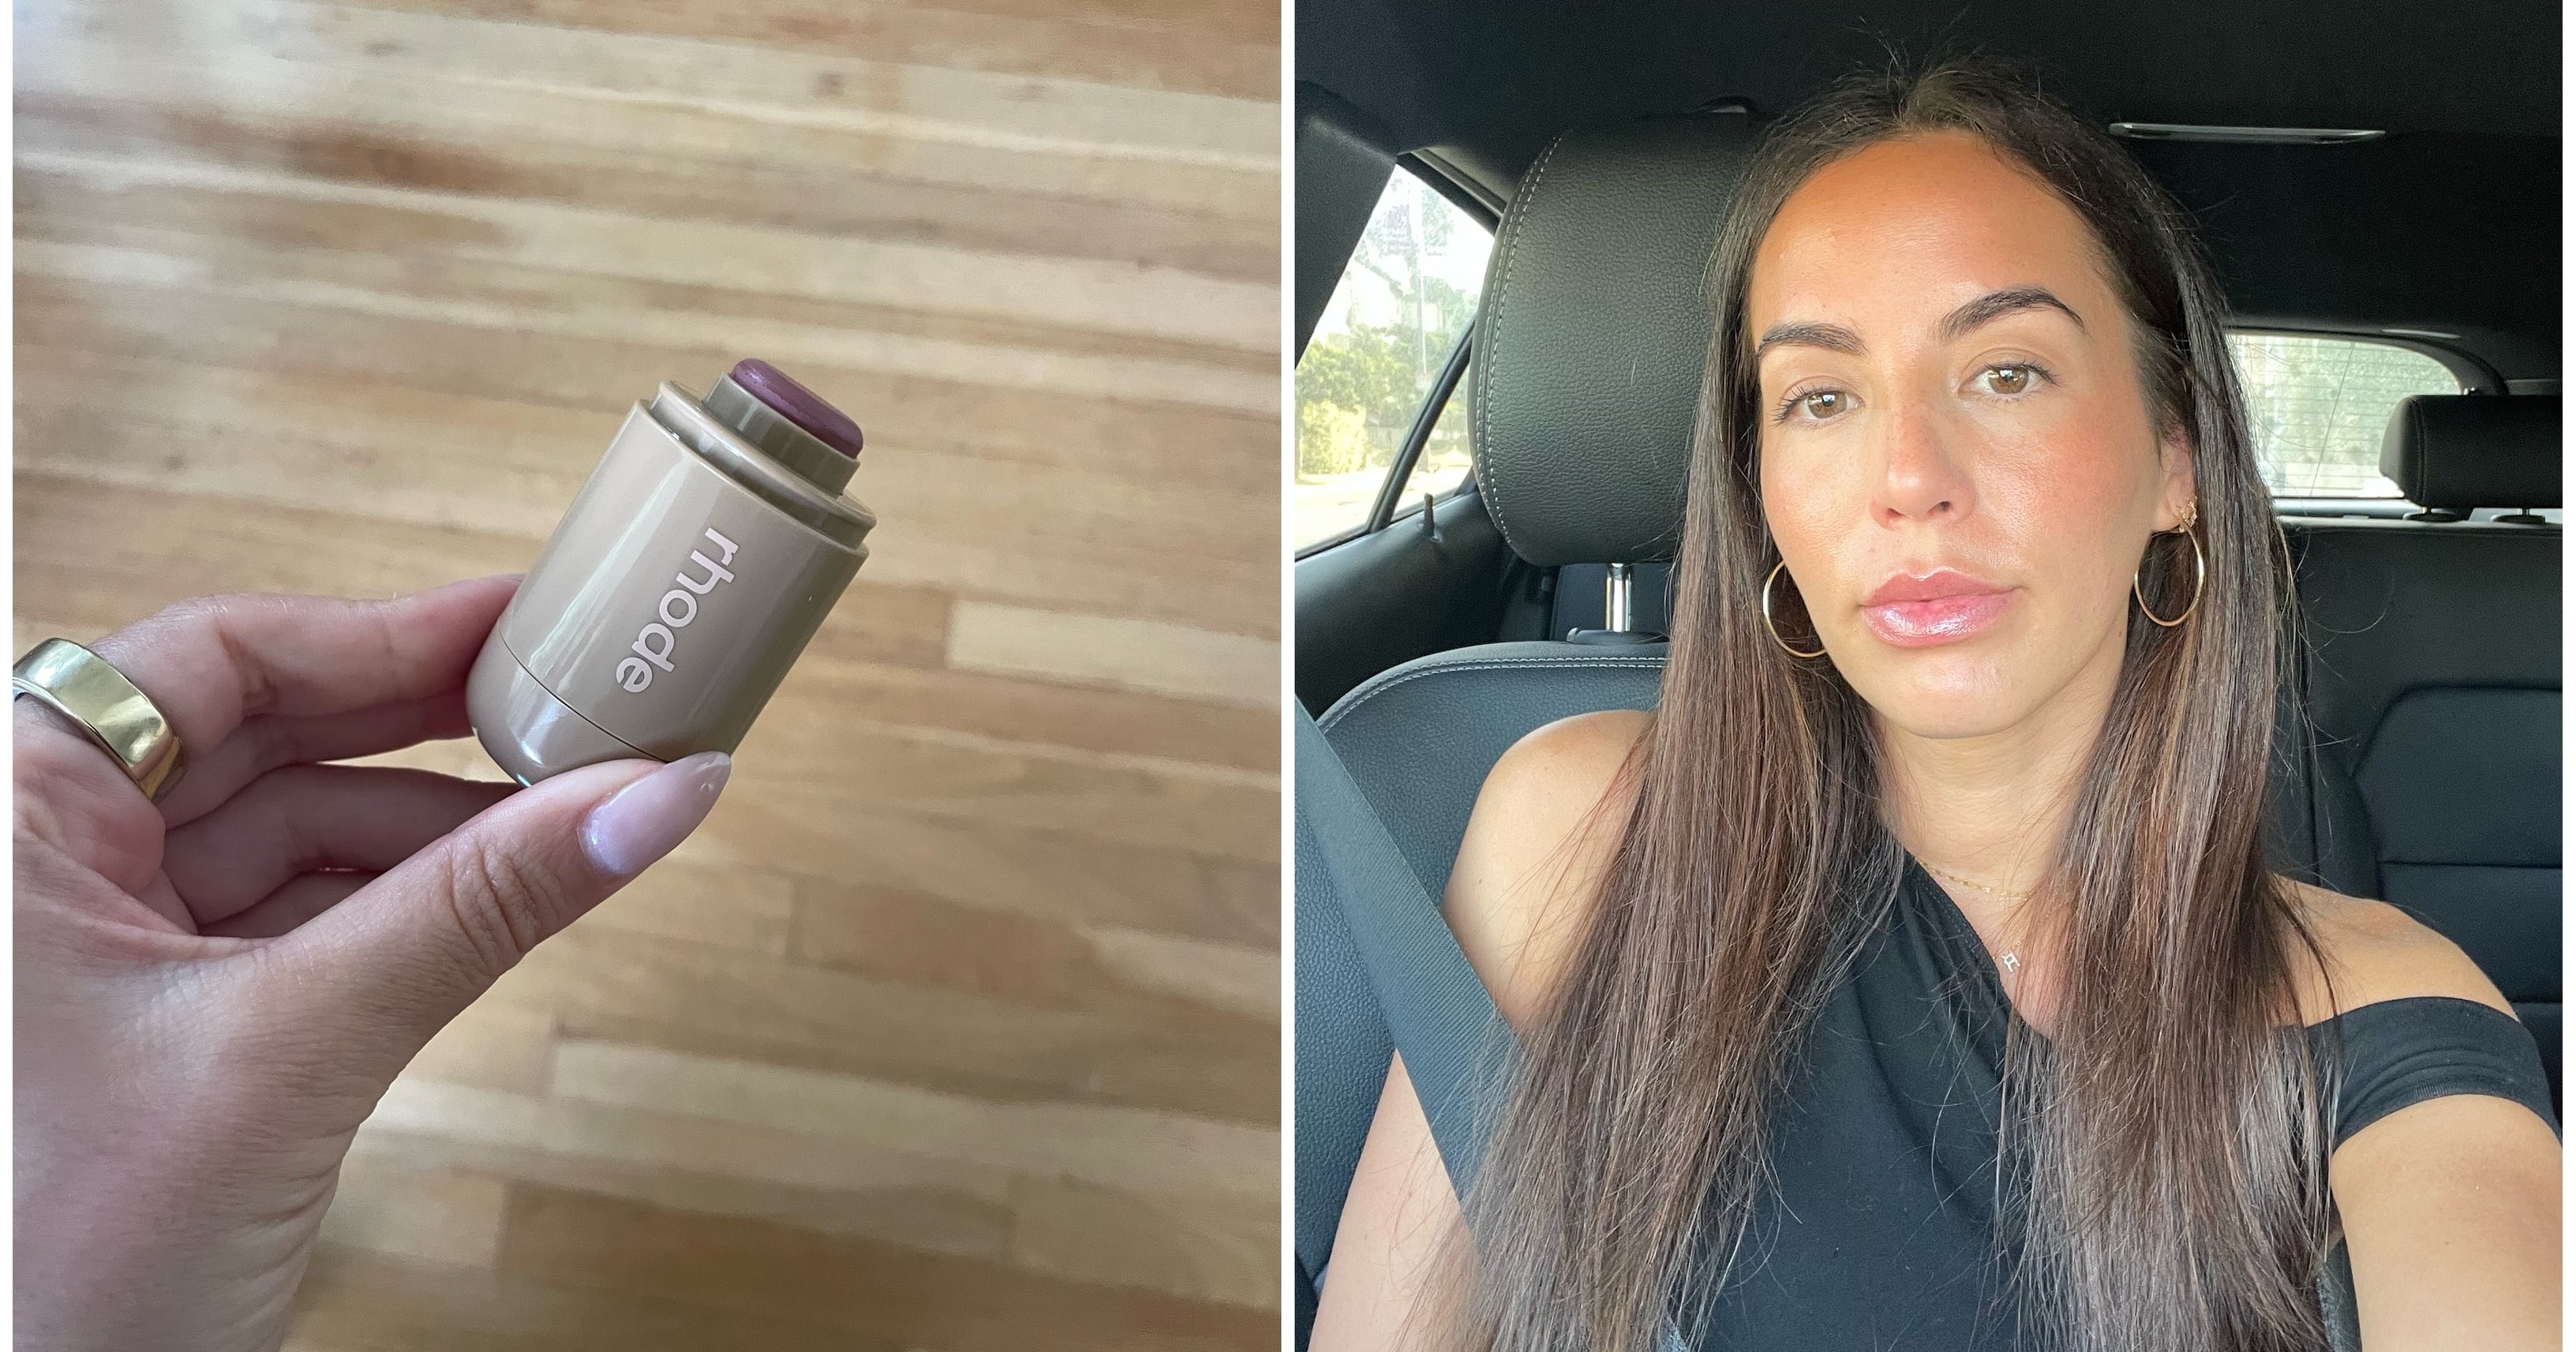 Hailey Bieber’s Rhode Just Launched Blush, and I Have Thoughts